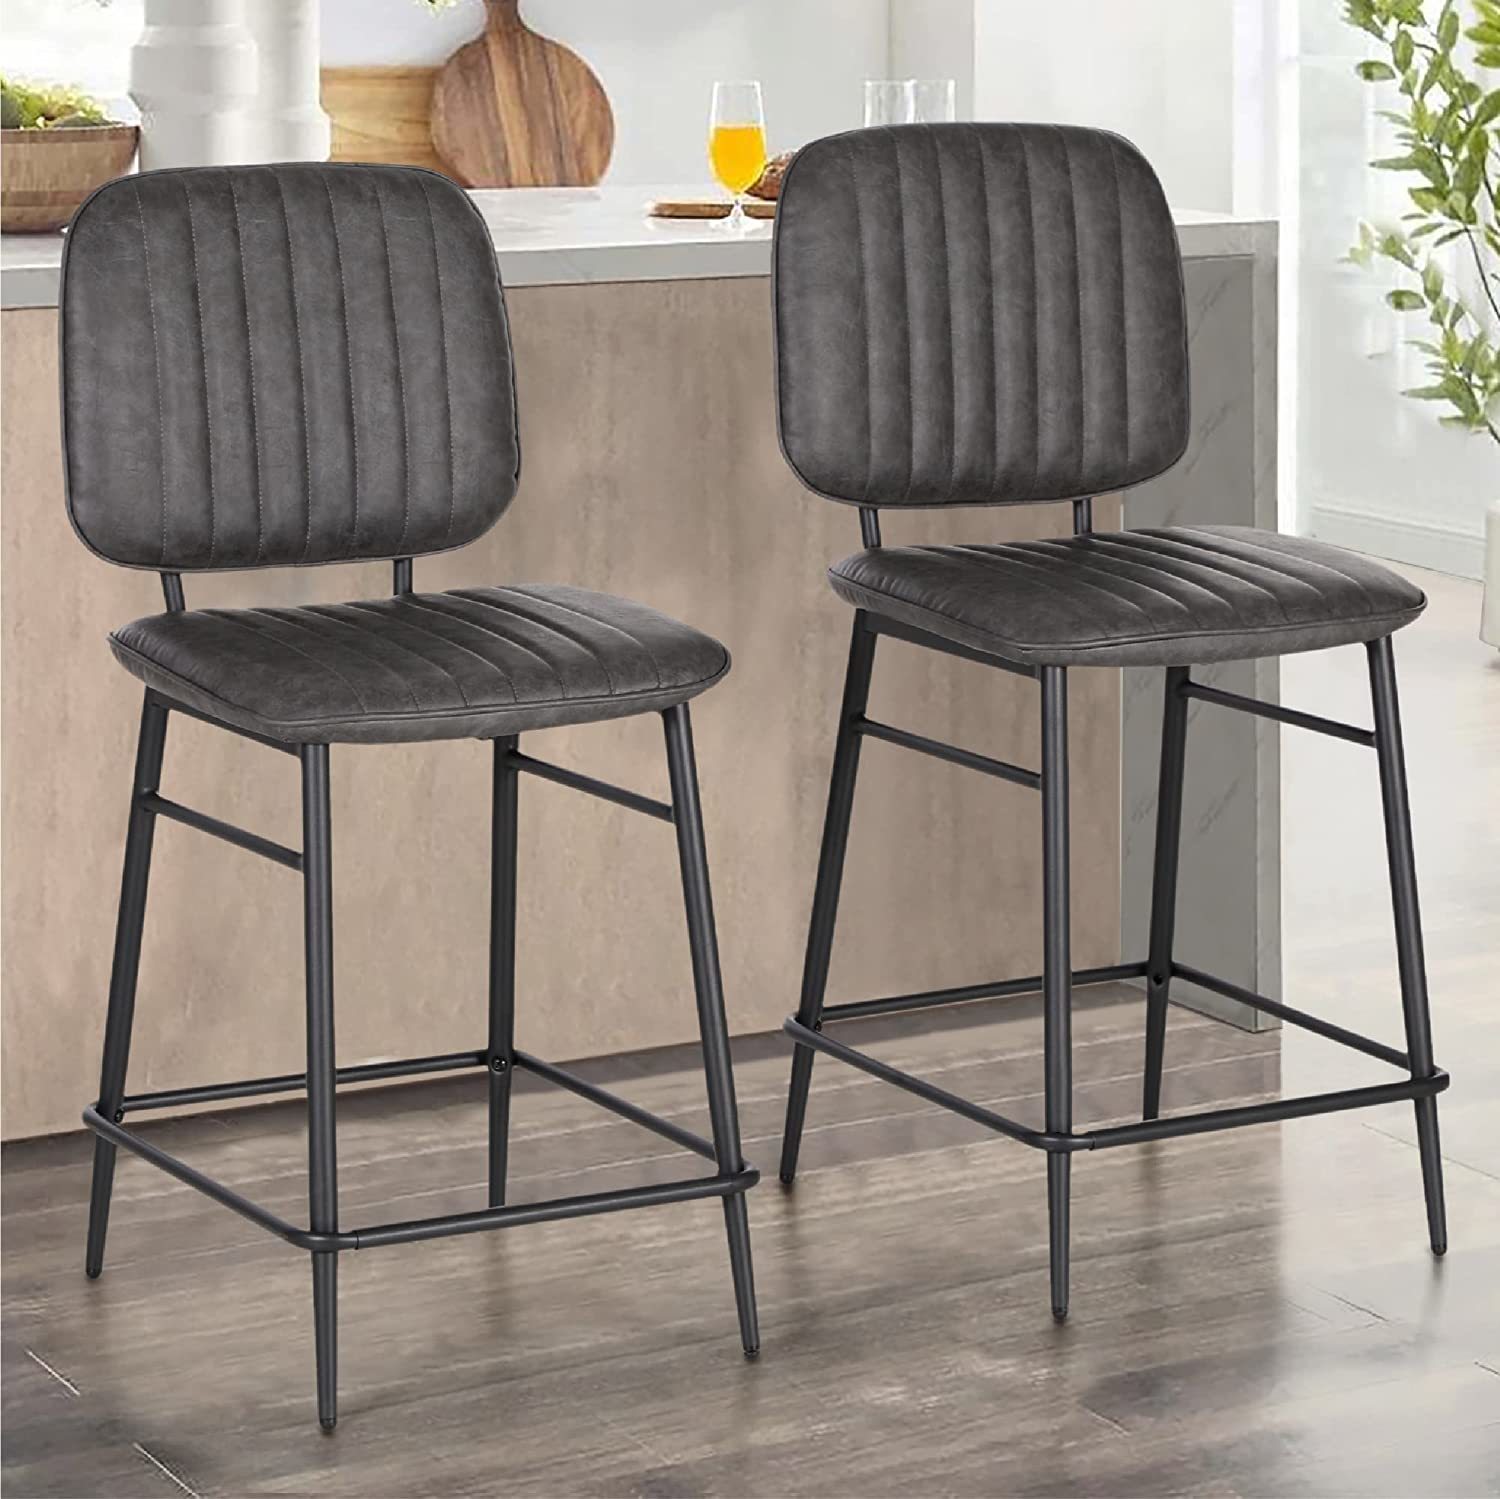 Primary image for ALPHA HOME Bar Stools Set of 2, Counter Stools with High Back, Modern